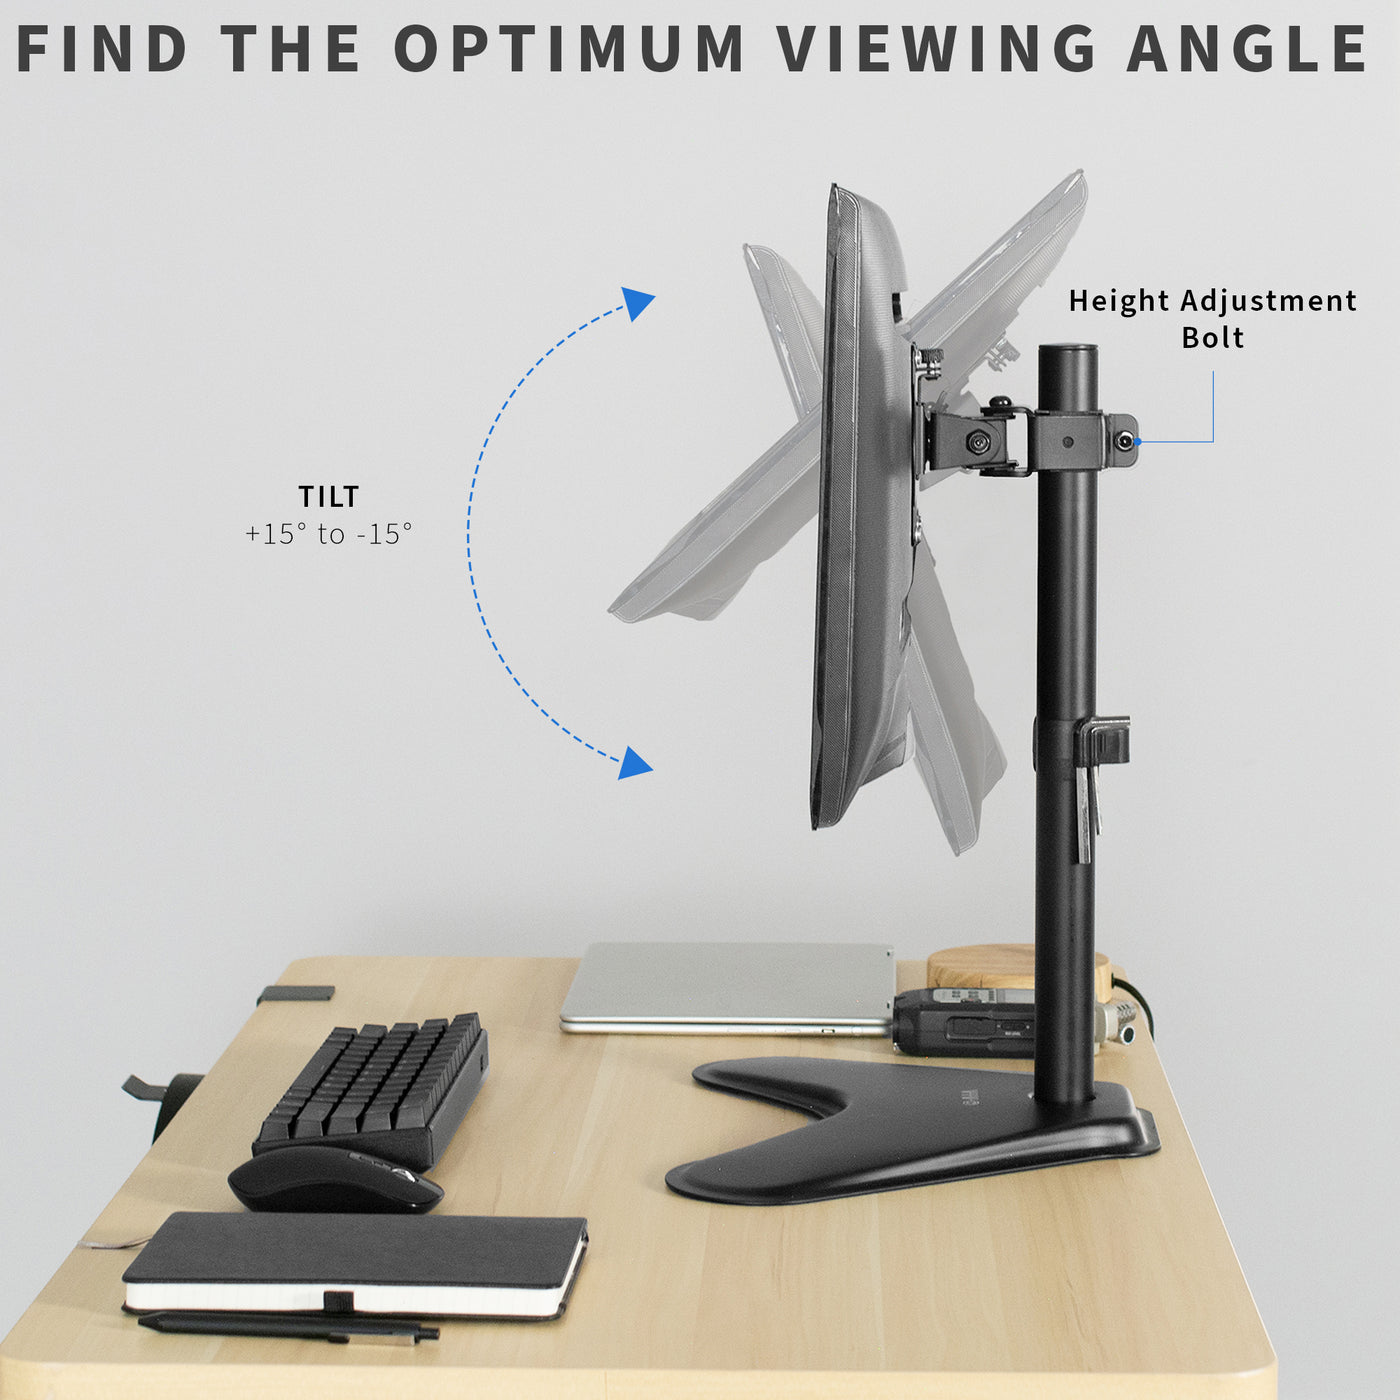 With tilt and adjustment movements for optimum viewing.